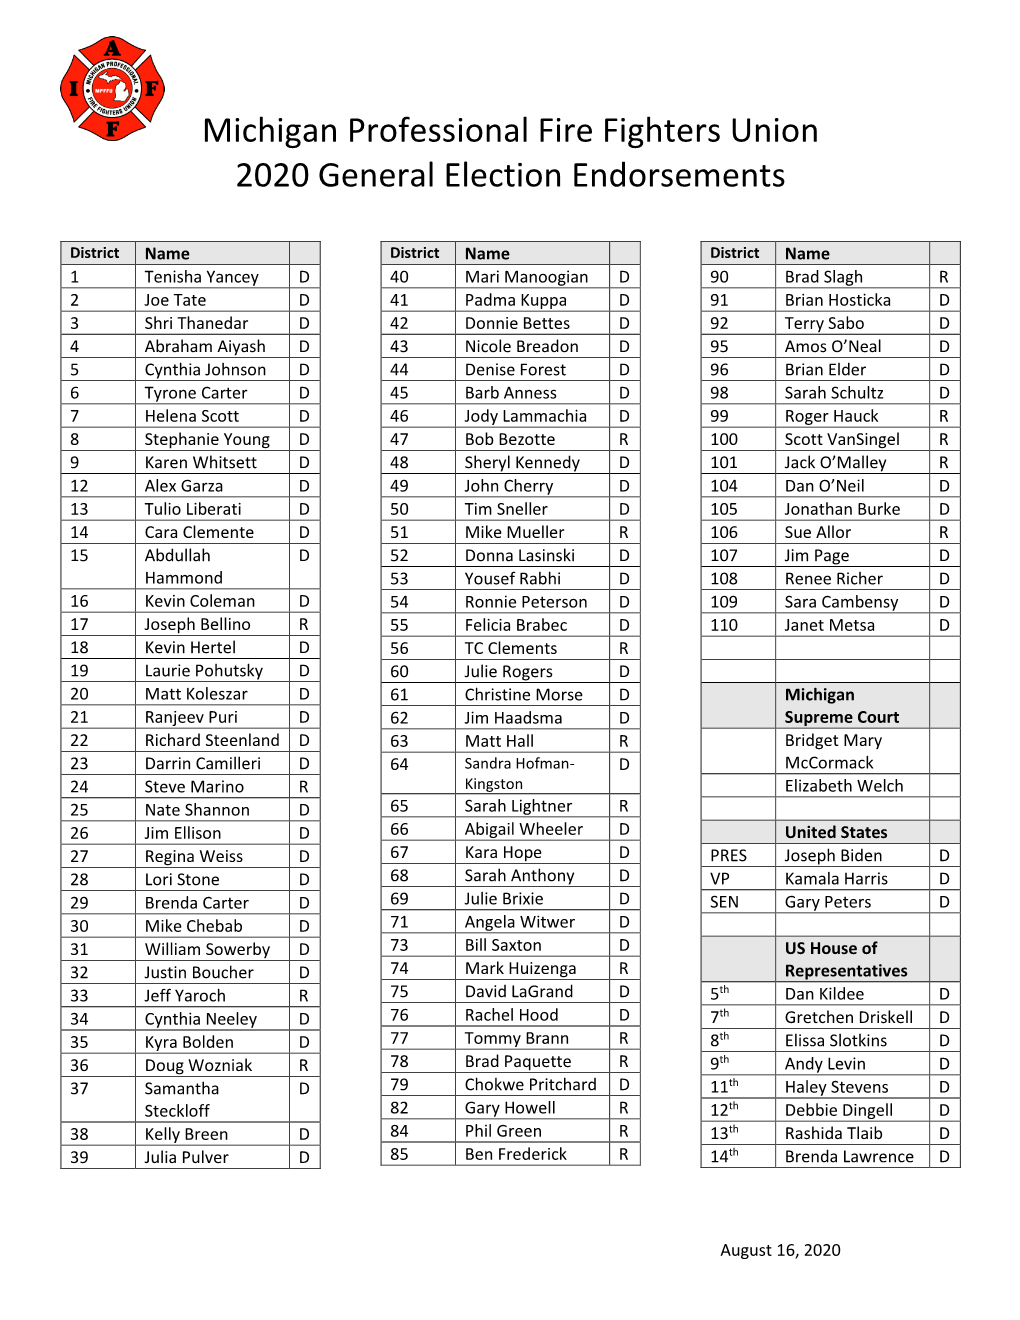 Michigan Professional Fire Fighters Union 2020 General Election Endorsements